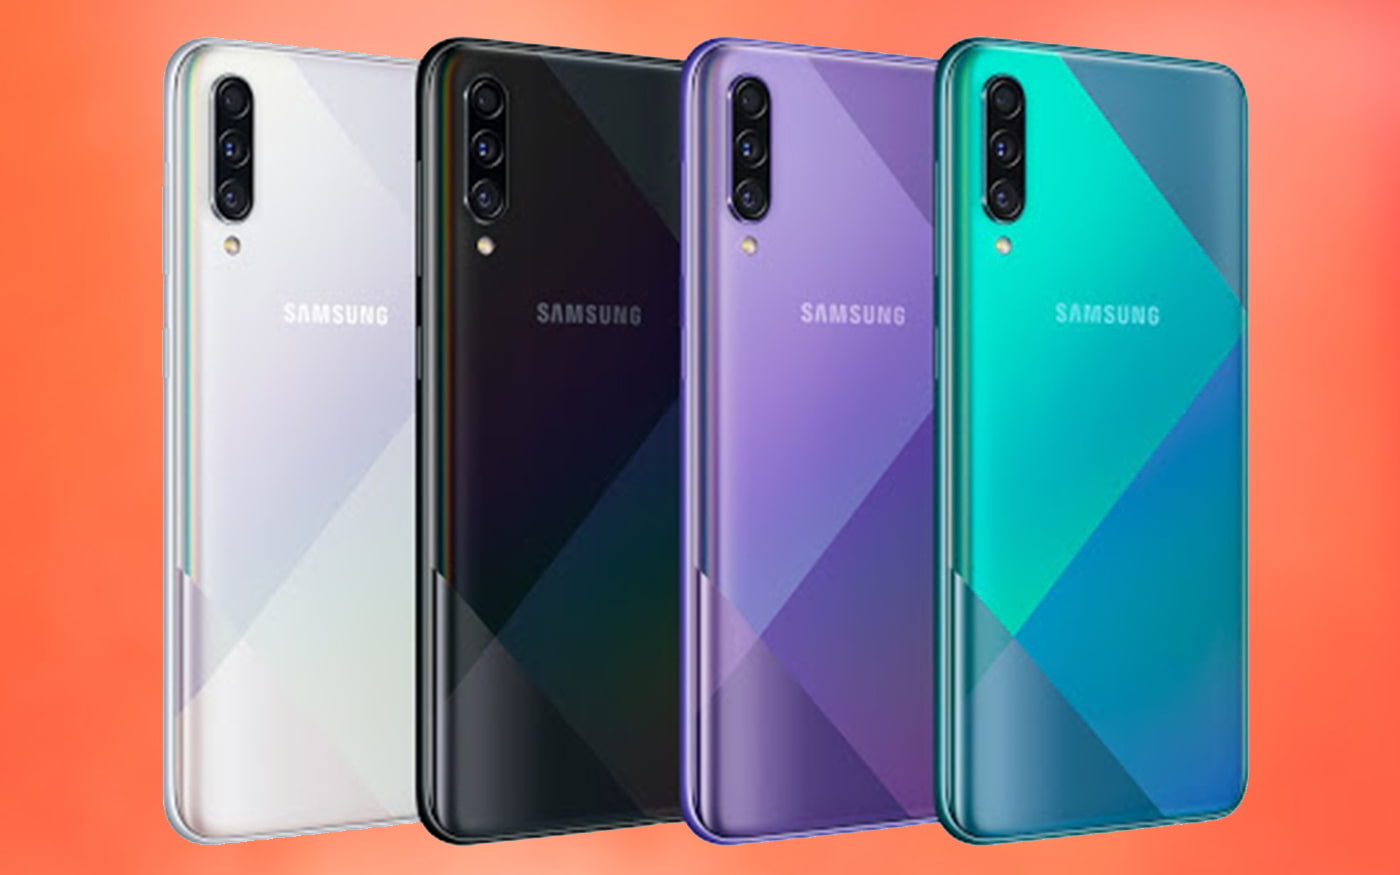 Galaxy A50s gets OneUI 2.0 based on Android 10